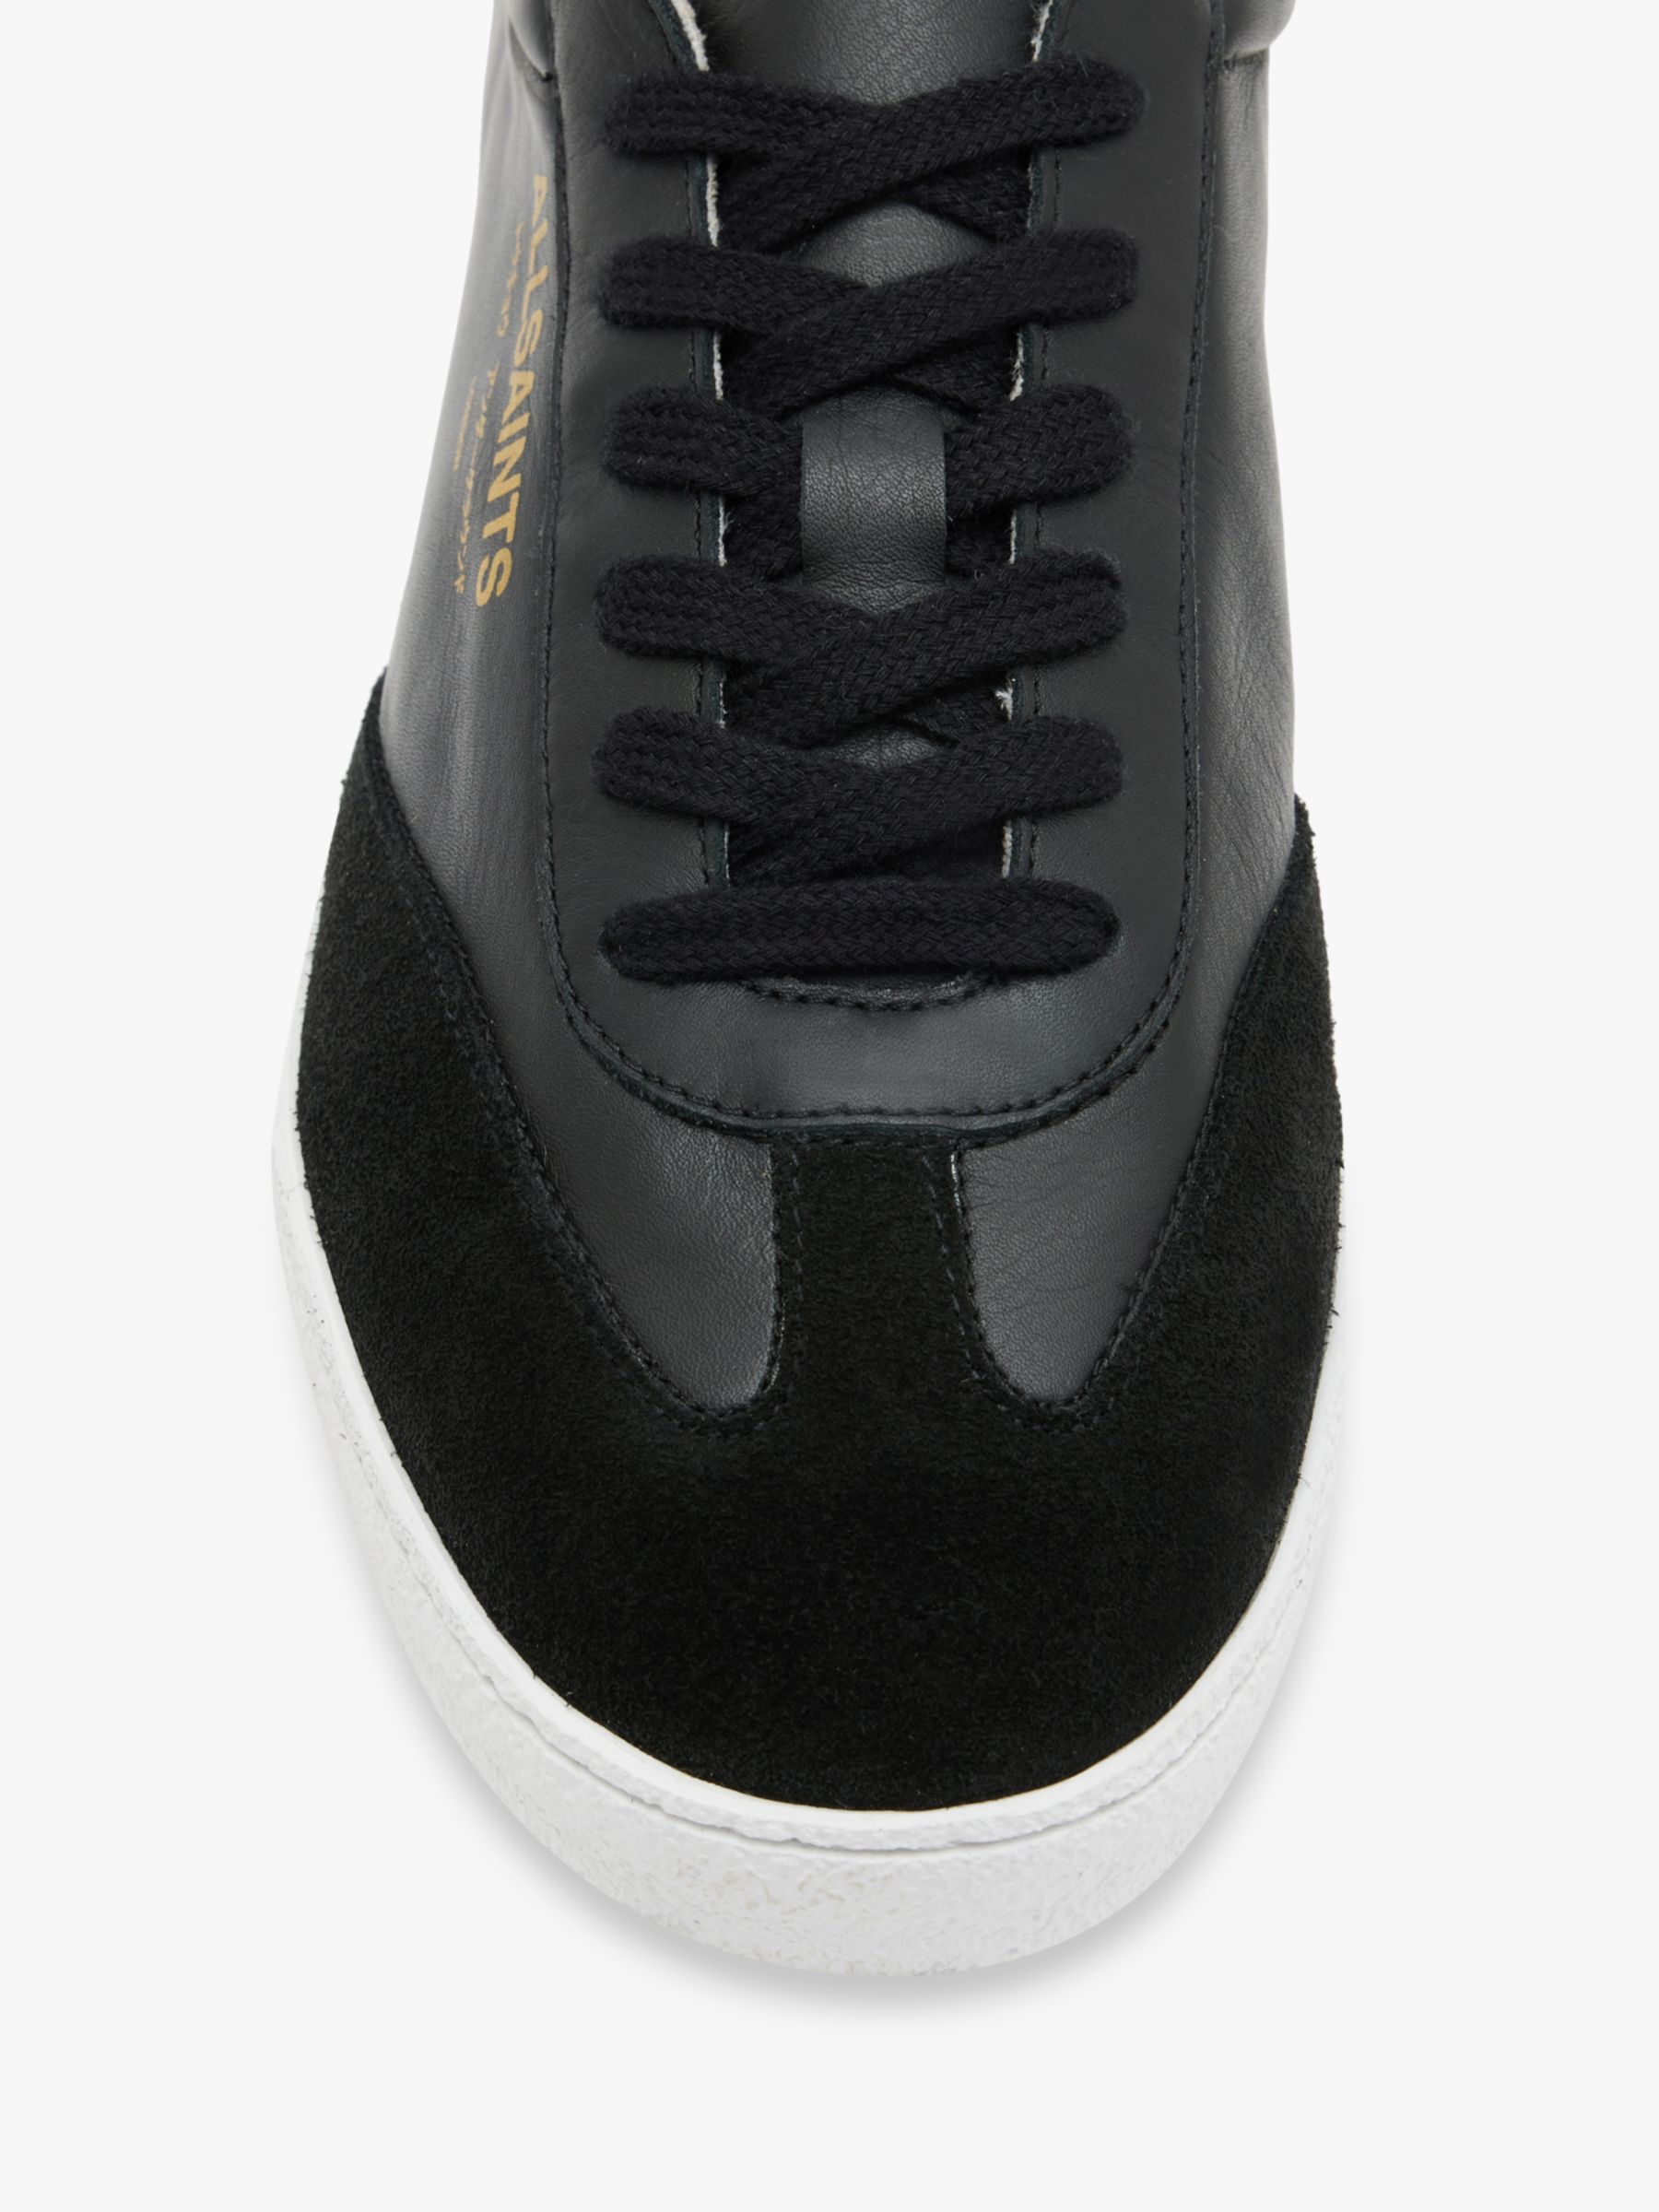 AllSaints Thelma Leather Trainers, Black, 3